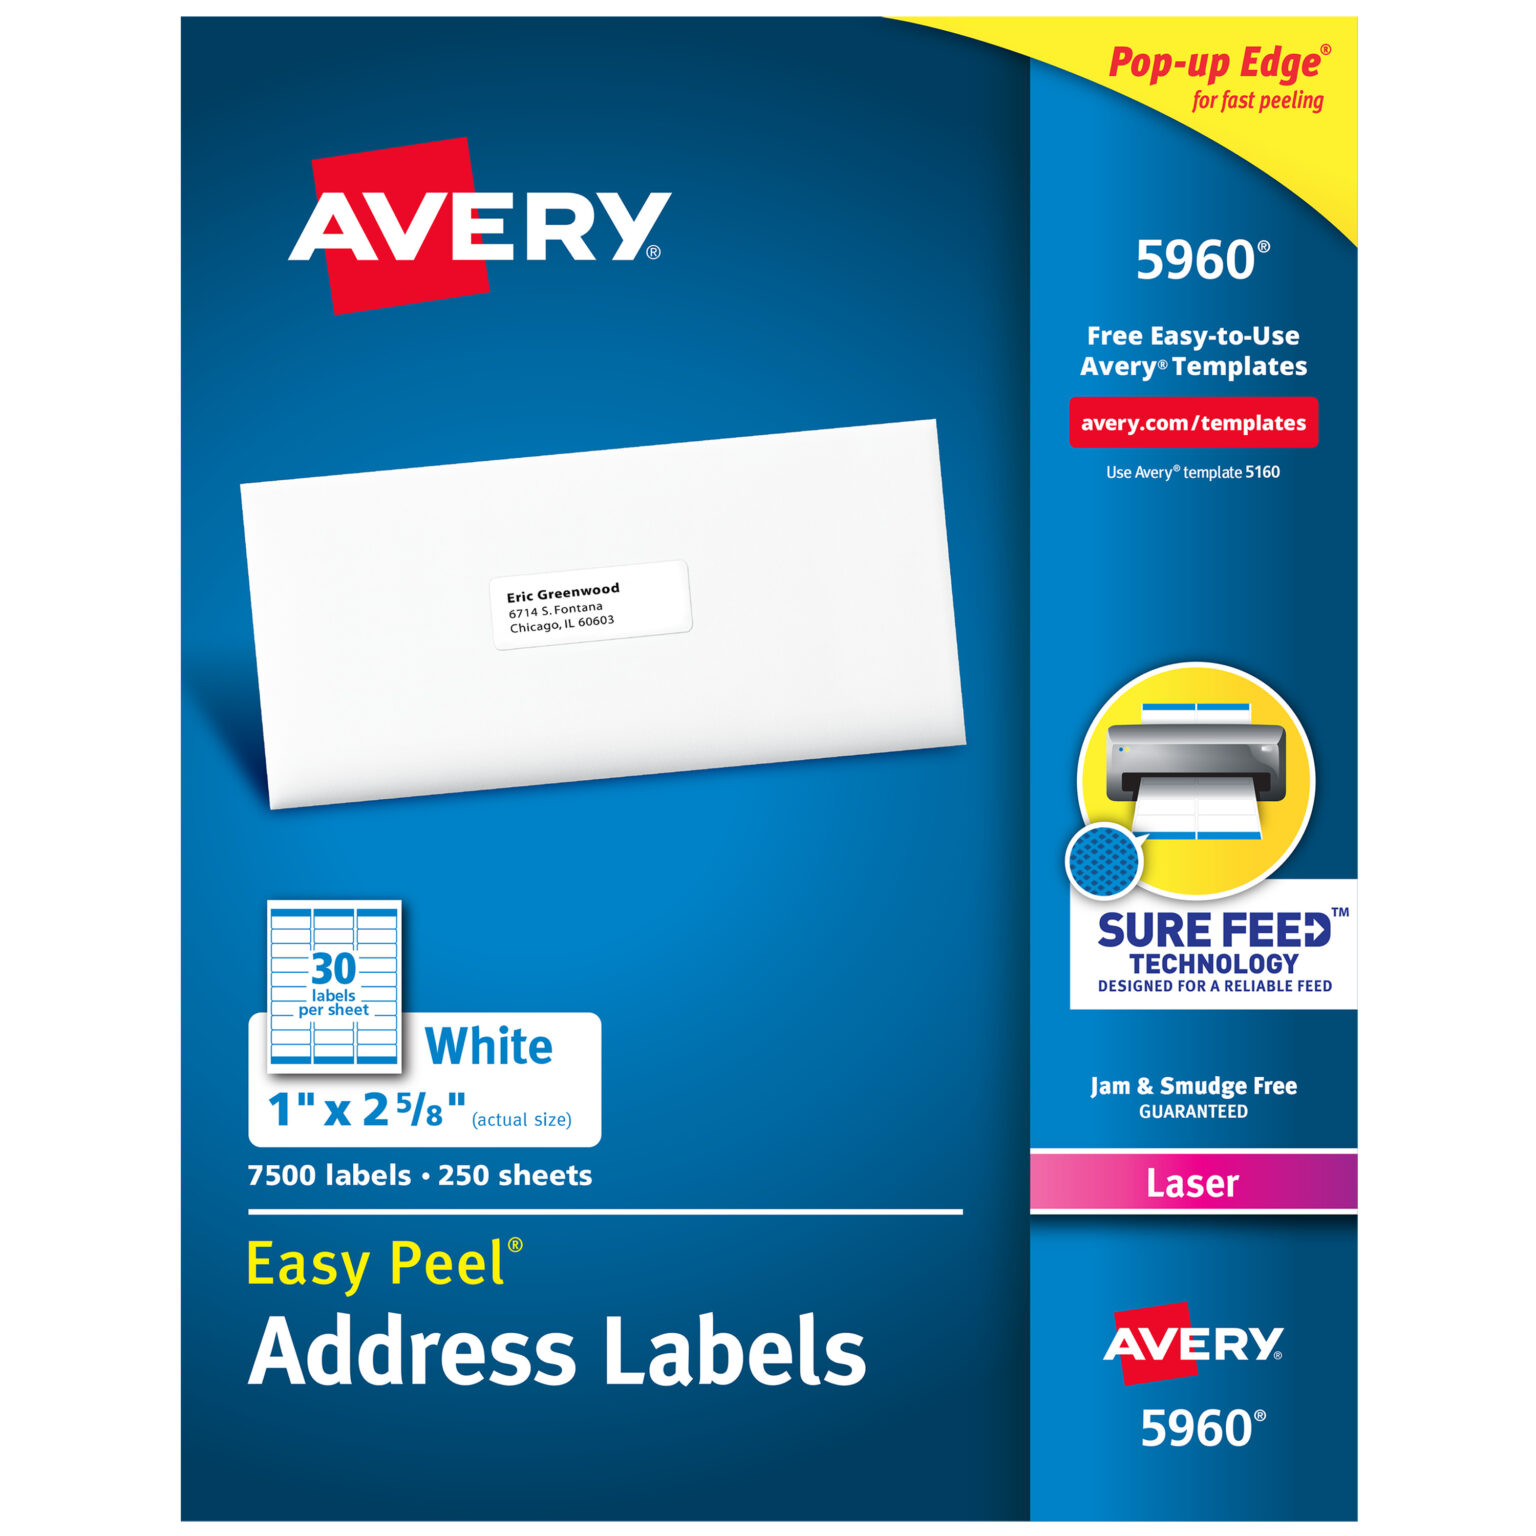 avery-labels-5960-colona-rsd7-in-office-depot-label-templates-best-template-ideas